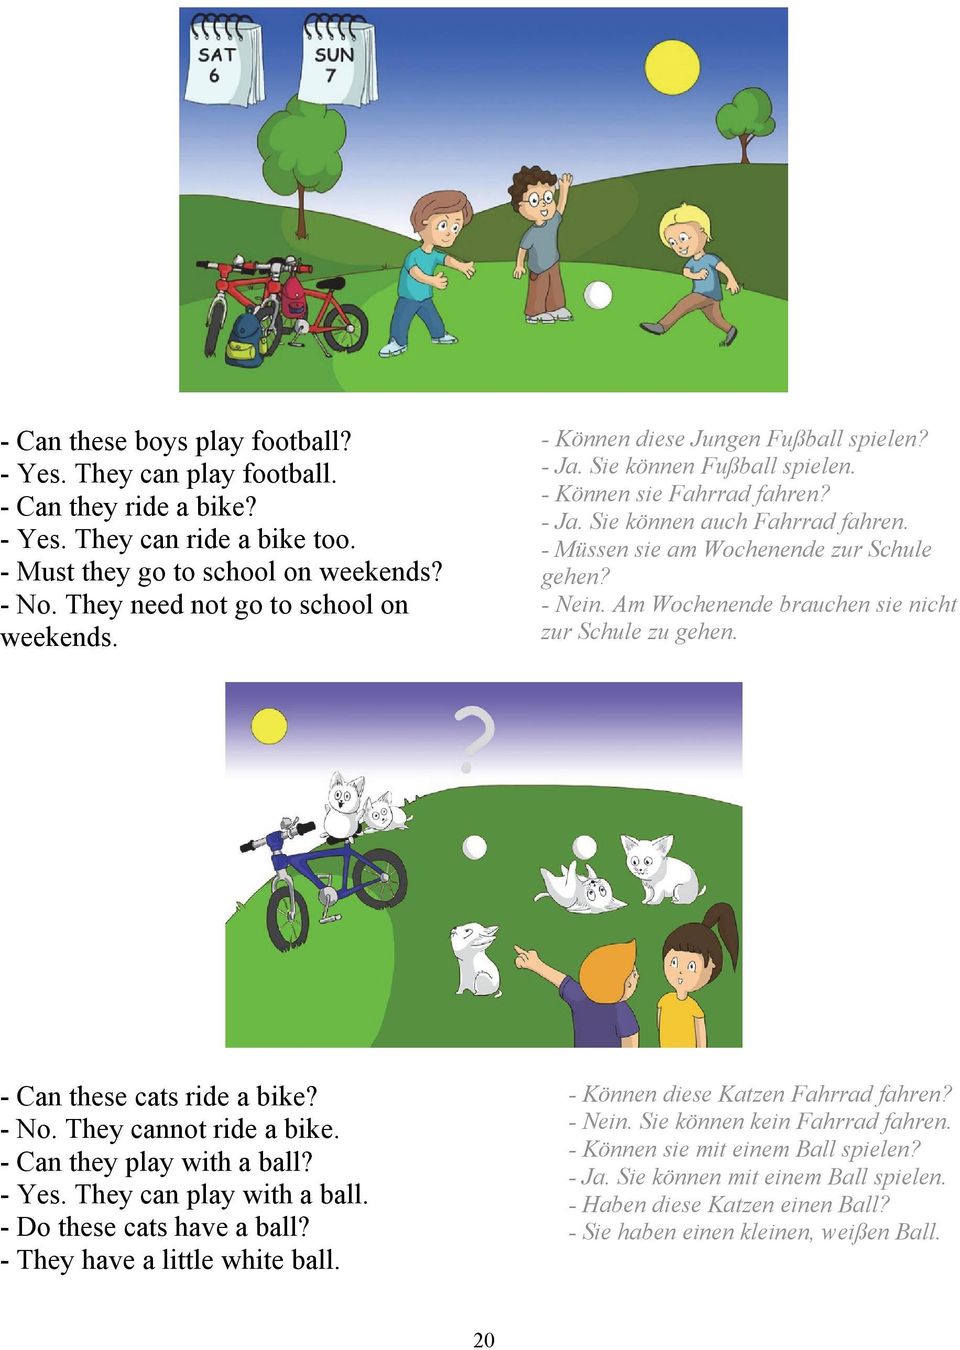 - Müssen sie am Wochenende zur Schule gehen? - Nein. Am Wochenende brauchen sie nicht zur Schule zu gehen. - Can these cats ride a bike? - No. They cannot ride a bike. - Can they play with a ball?